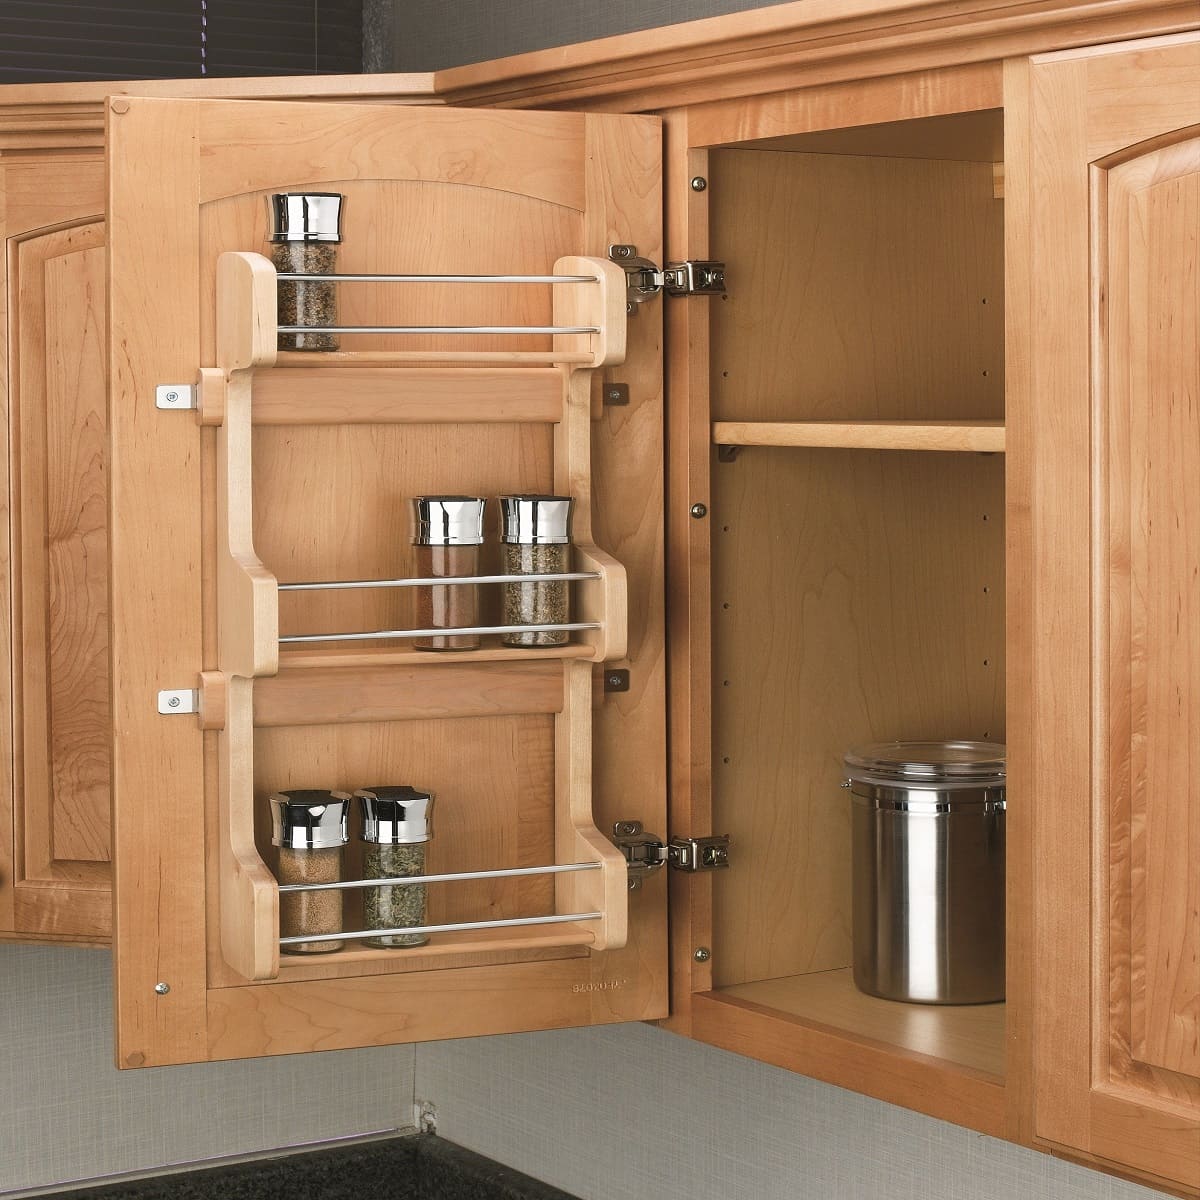 What Rev-A-Shelf Size Should I Get For A 15-Inch Pantry Cabinet